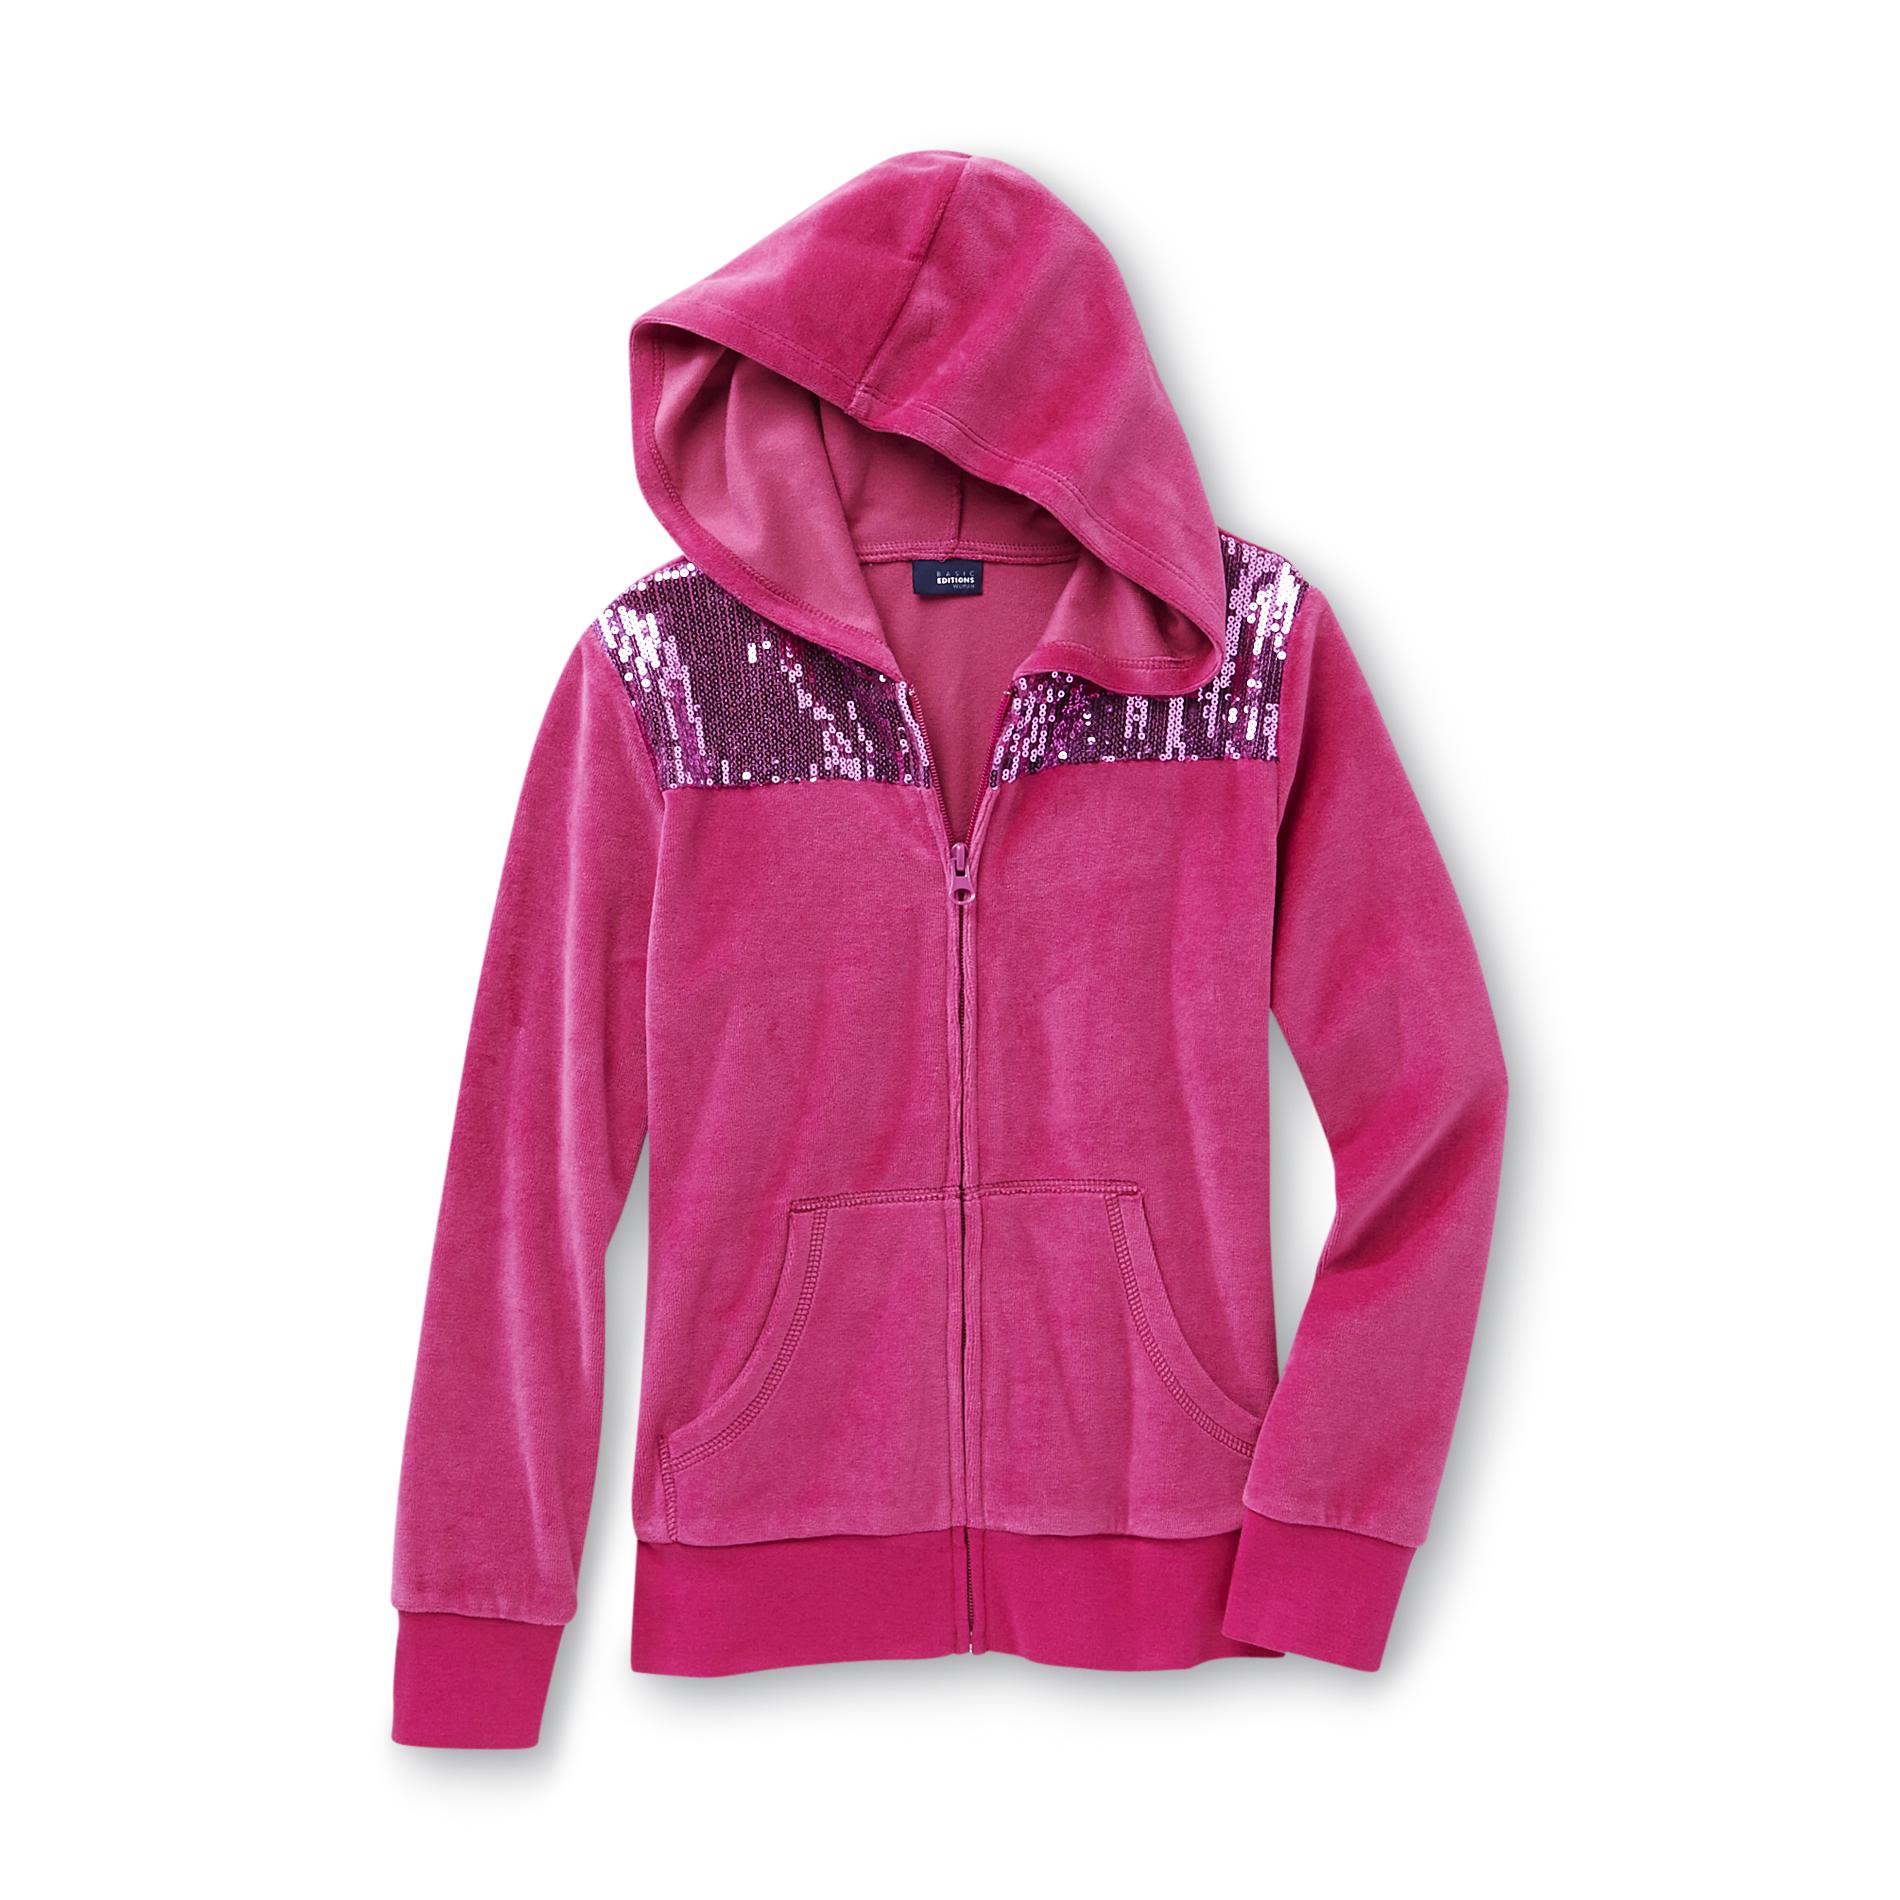 Basic Editions Girl's Neon Velour Hoodie Jacket - Sequins